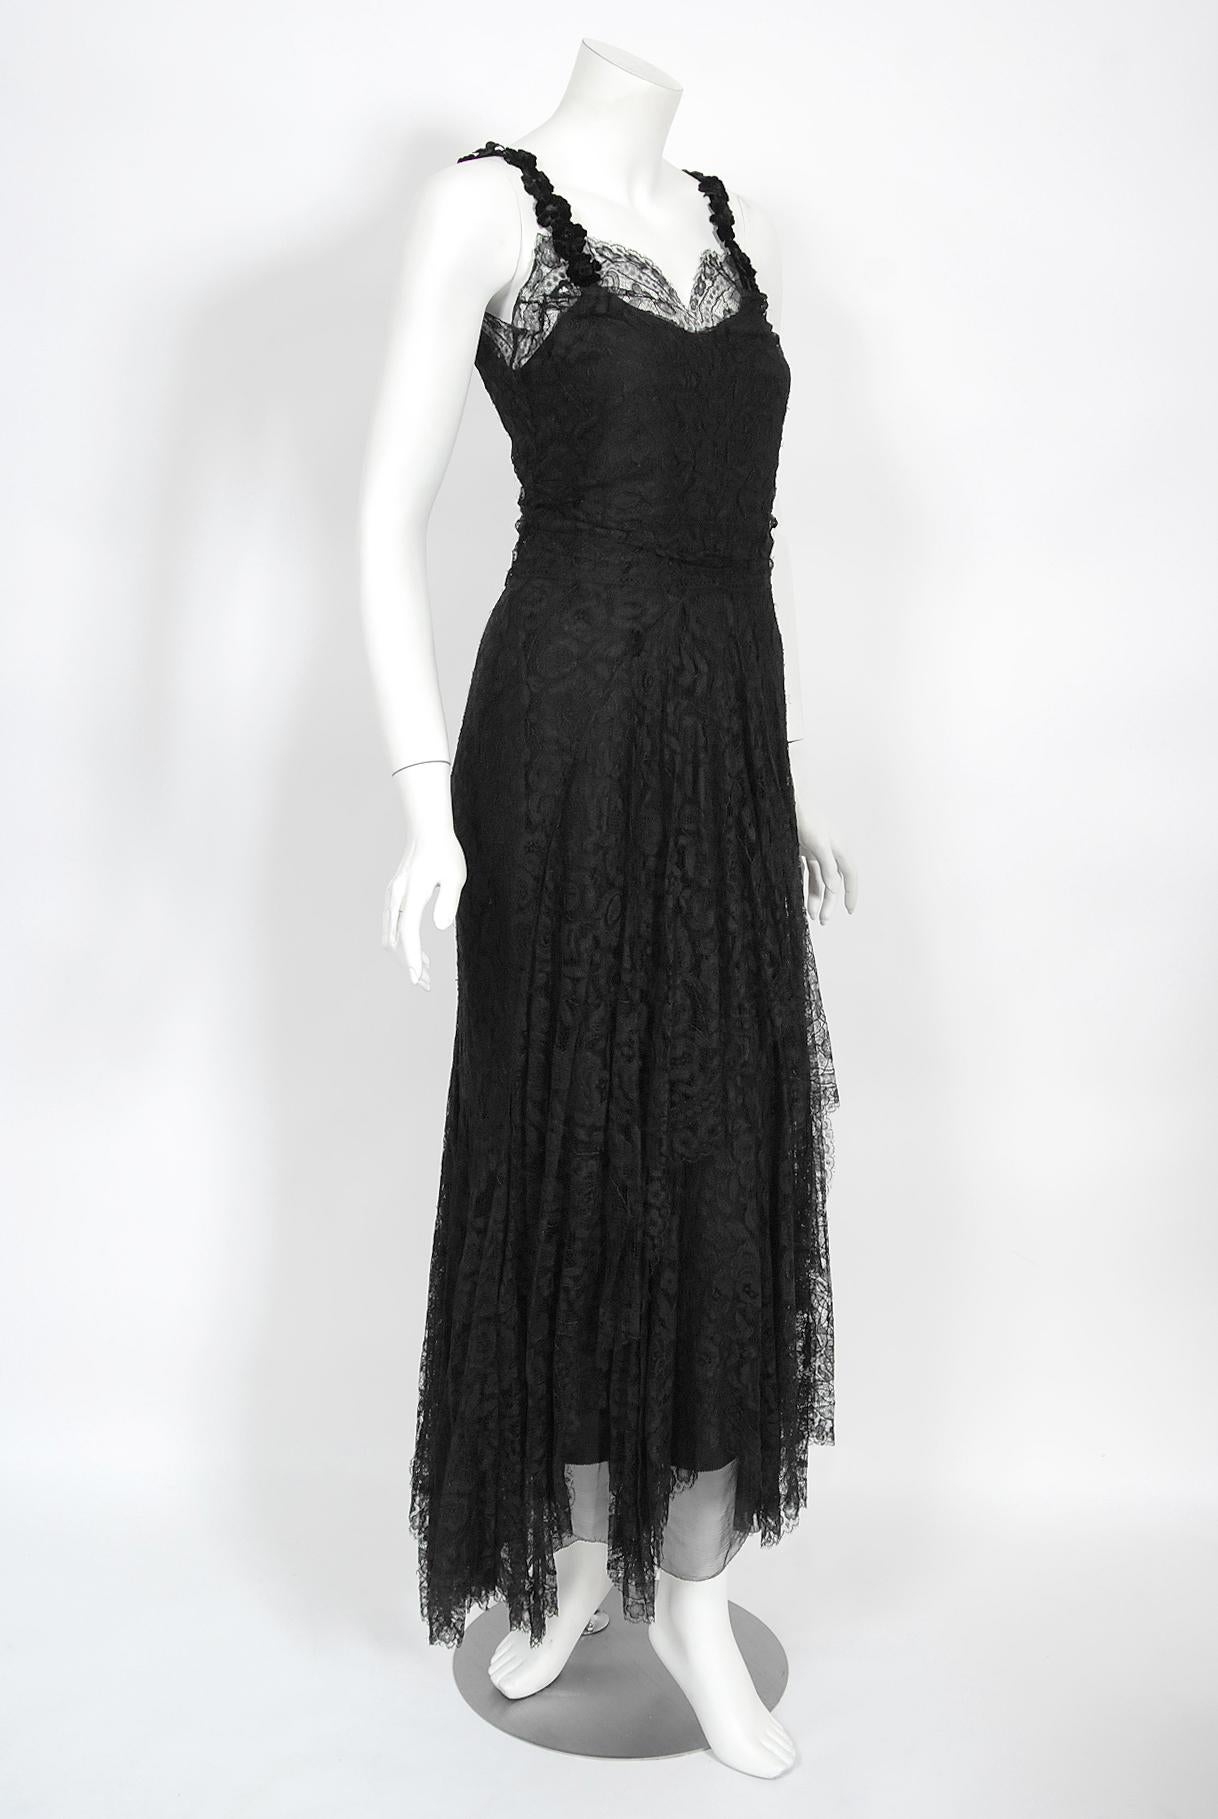 Vintage 1930's Bonwit Teller Couture Black Scalloped Lace Appliqué Bias-Cut Gown In Good Condition For Sale In Beverly Hills, CA